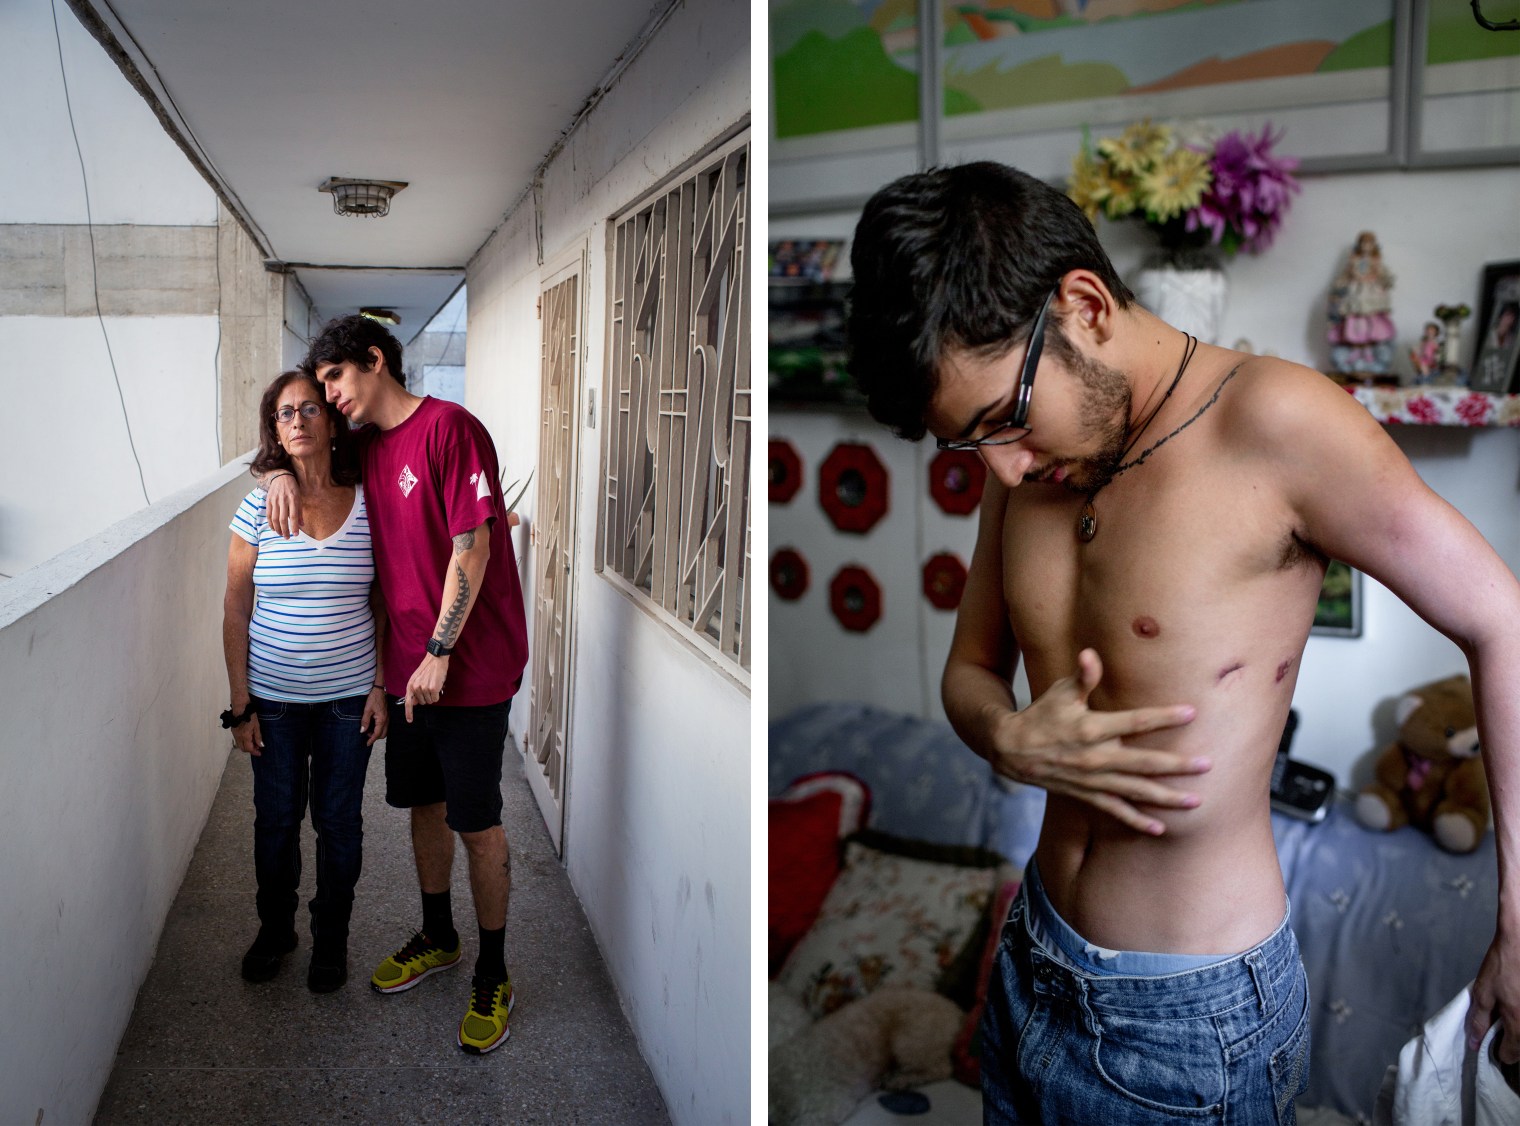 MOTHER/SON: August 1, 2017. Caracas. (El Valle). Juan Carlos Ramos (Koji), 34, poses for a portrait with his mother, Raquel Velasquez, 66, in their building in El Valle. The barrio of El Valle, once a stronghold of Chavismo, has been the site of violent confrontations between protesters, police, and pro-government gangs in recent months, resulting in several deaths within blocks of his home. A DJ and clothing designer, he say the parties he used to play at have stopped, and because of the inflation and disruptions from the protests he hasn't been able to fill orders for his clothing brand. I ask if he thinks about leaving the country? "Every day," he responds, but he doesn't want to leave his family. Velasquez was once a leftist activist, but now she is an organizer for Primer Justicia, an opposition party. When asked what issues are most important to her she responds immediately, "The future. A future for my children. A country where my whole family doesn't have to immigrate and we can be together. Our table used to be full at holidays. Now we're spread out all over the world.â BODY: August 2, 2017. Caracas. Pedro Yammine, 22, shows puncture wounds in his side at his neighbors apartment, from where he had to have tubes in his lungs after being run over by a tank during the protests in May. He had 13 fractures all together, his lungs were punctured and filled with fluid, he had massive contusions. But he lived and today is recuperating well under the watchful eye of his terrified mother.